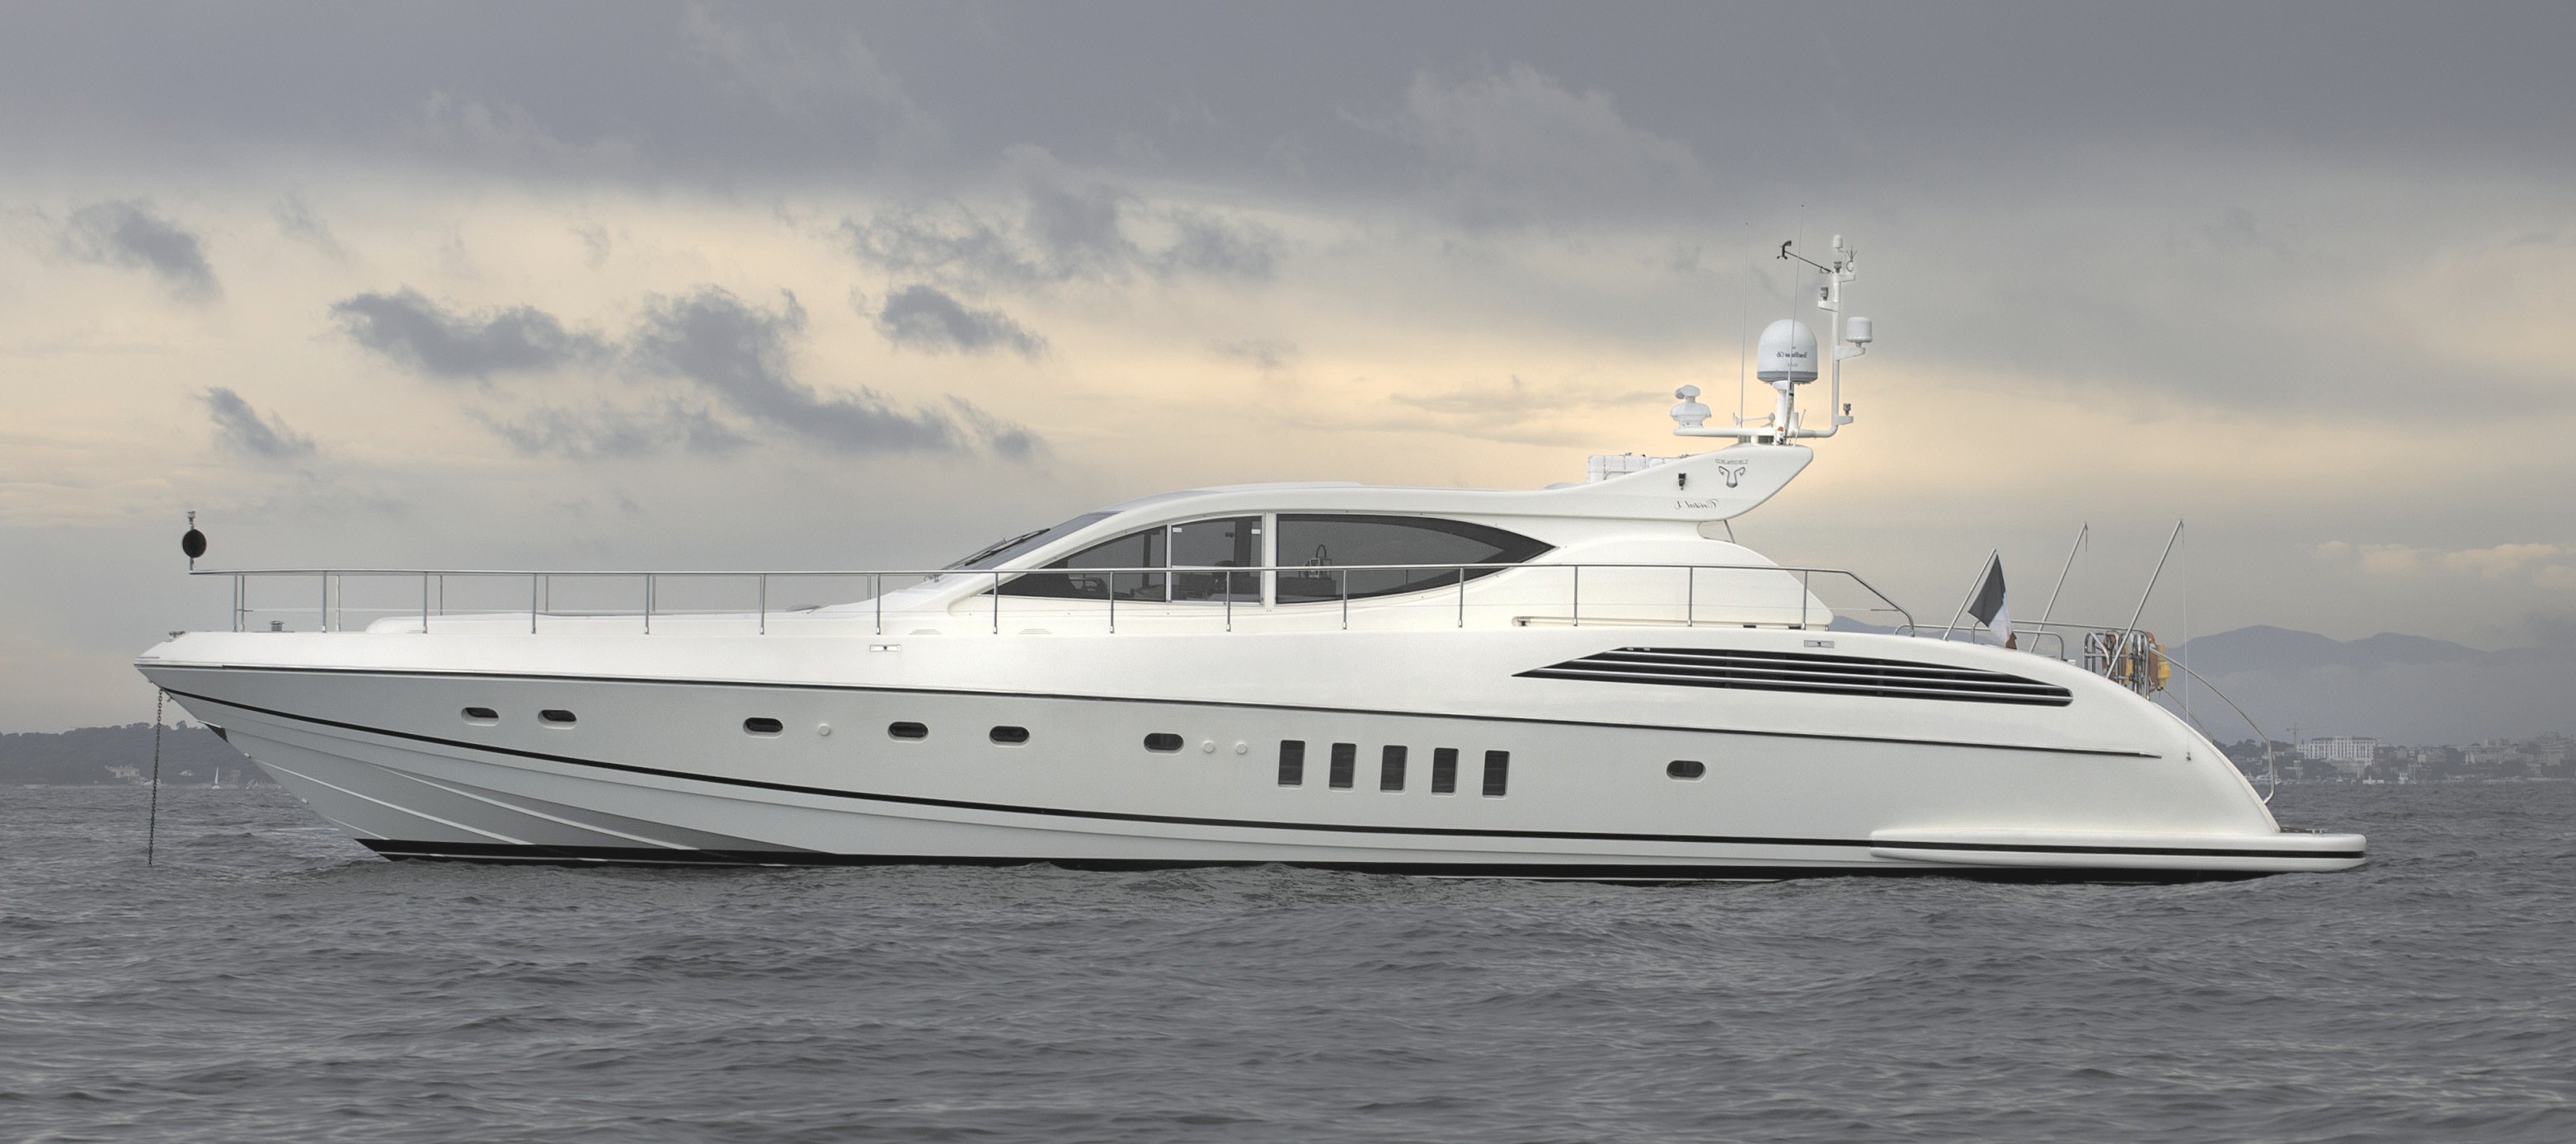 The 24m Yacht CRISTAL 1